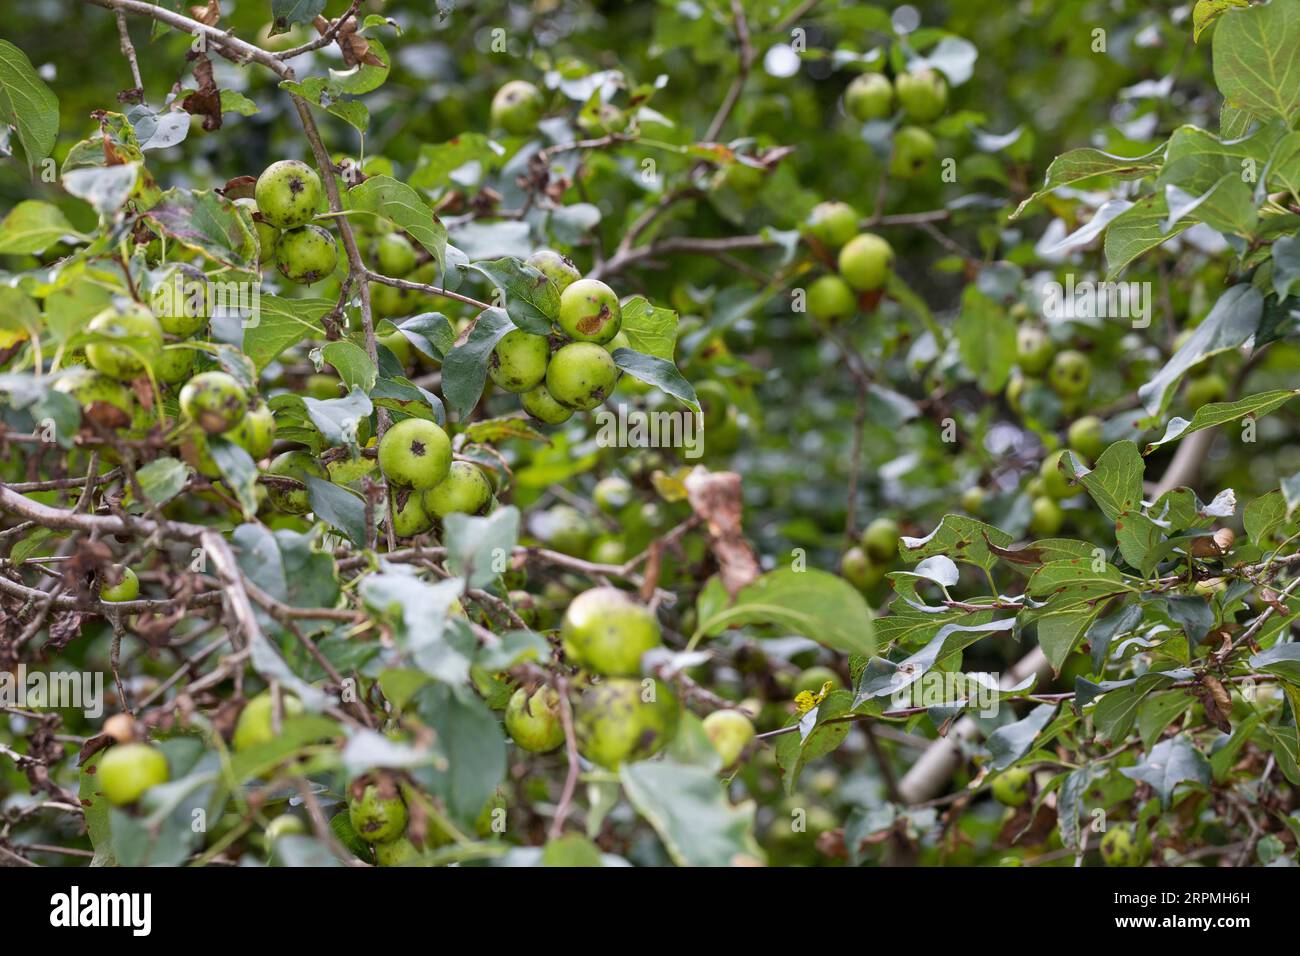 crab apple, wild crab (Malus sylvestris), fruits on a branch, Germany Stock Photo